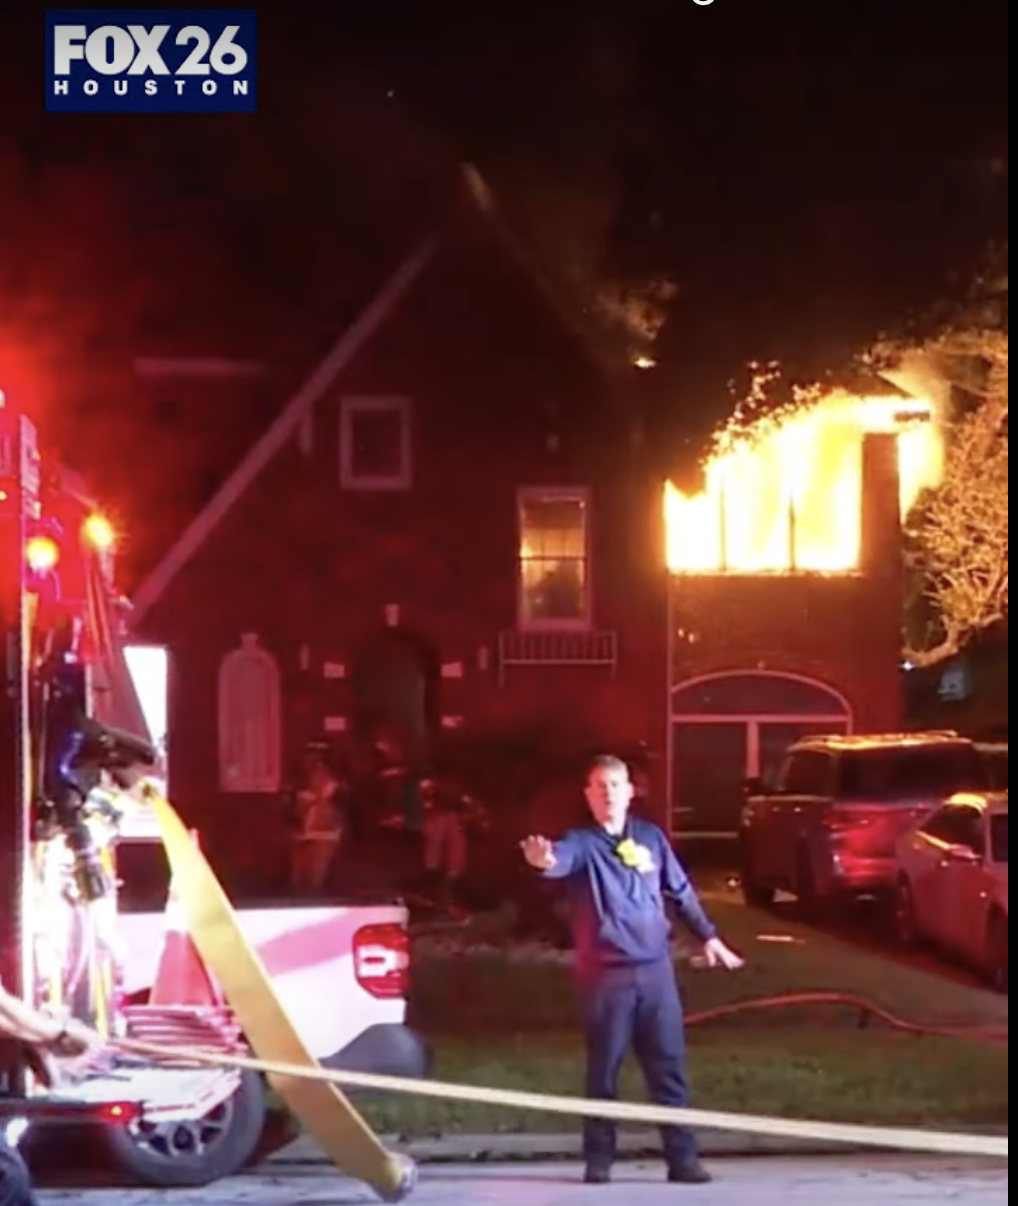 Beyoncé's childhood home caught fire on Christmas Day. Video